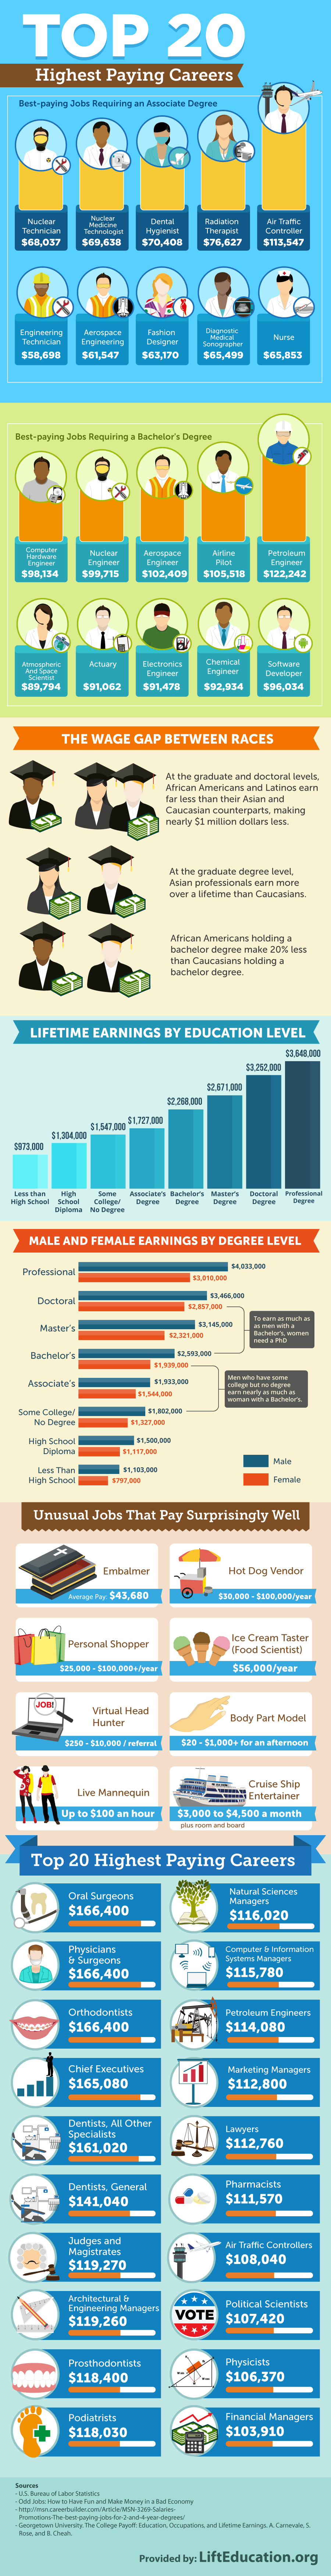 Top 20 highest paying careers